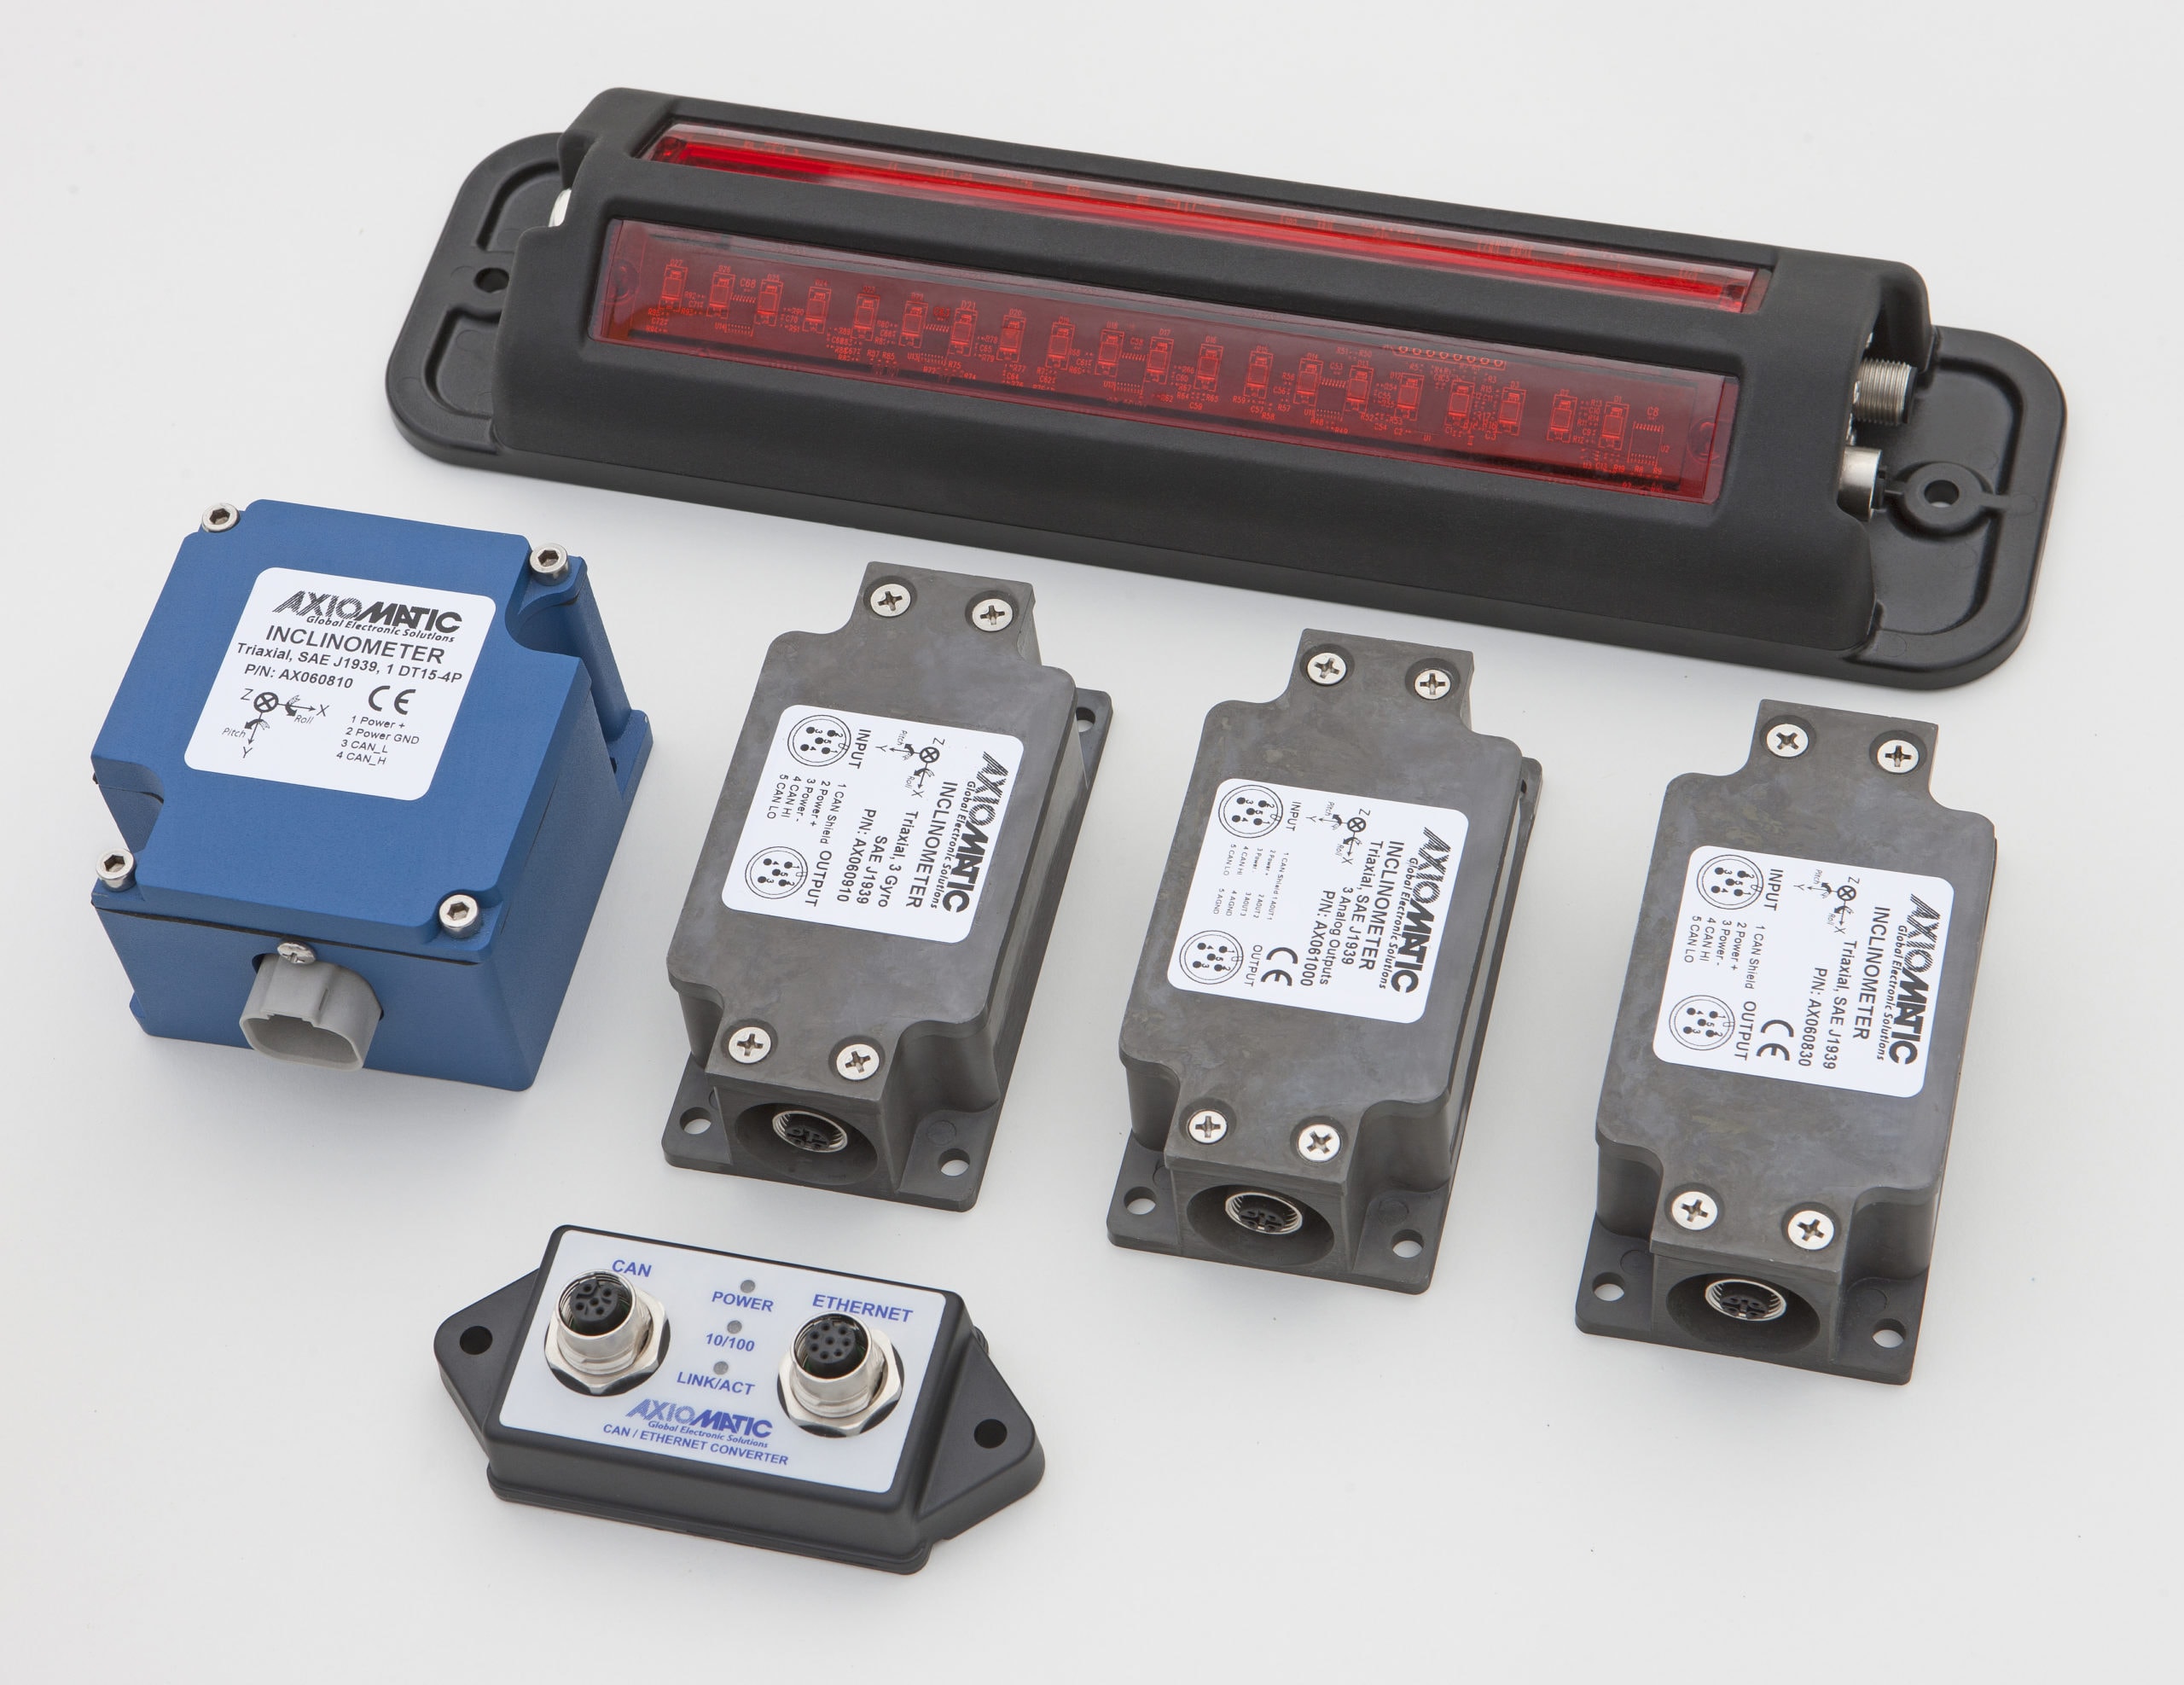 Machine Control Systems, Inclinometers, and Level Sensors